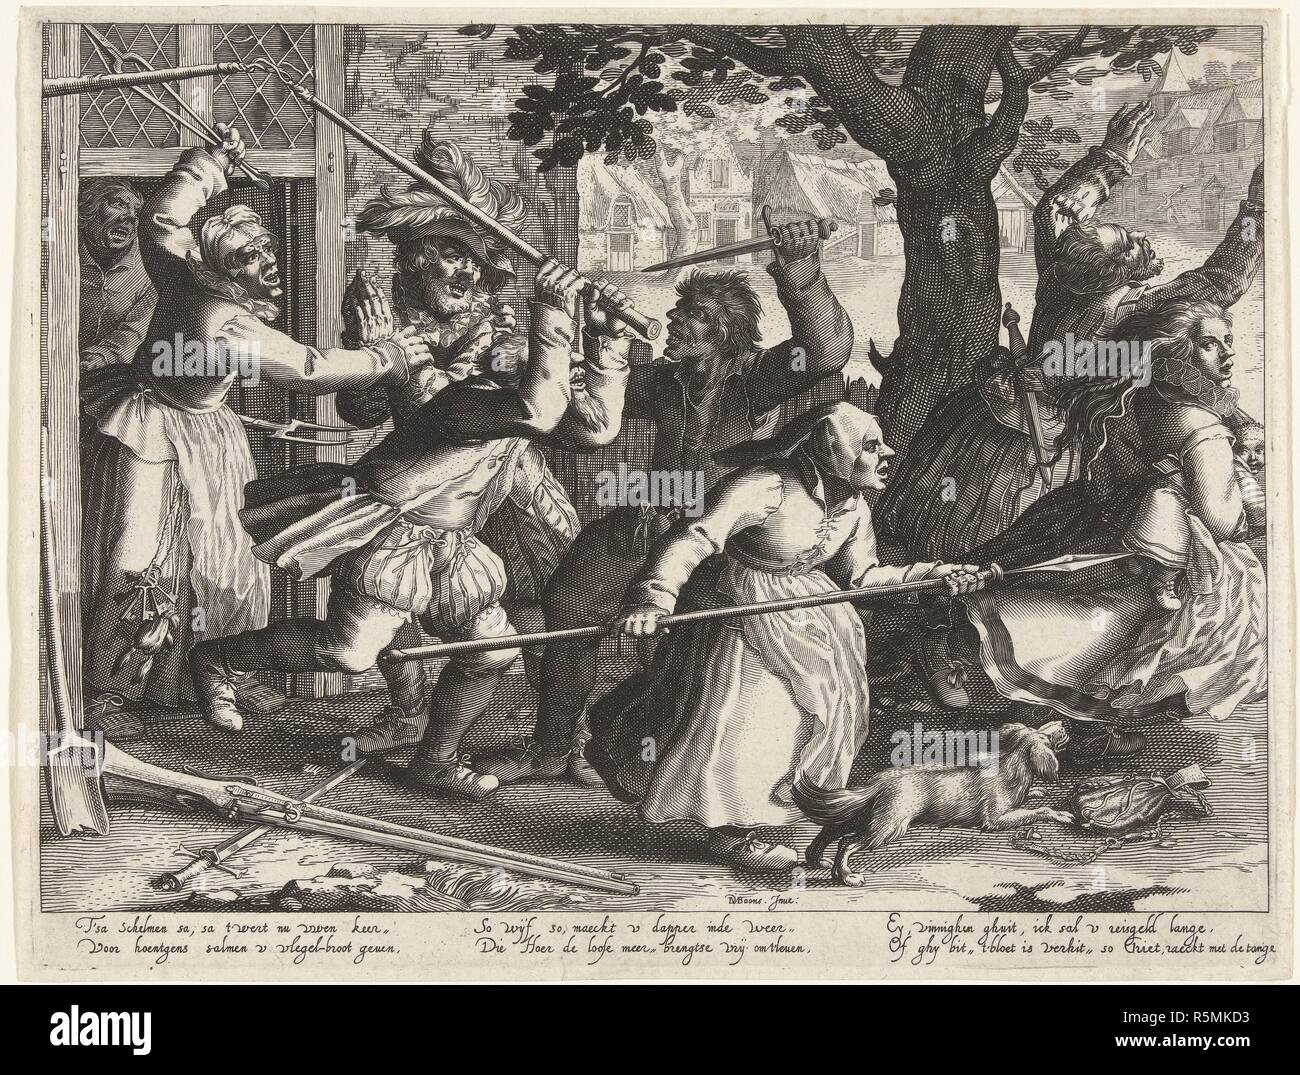 The rich people hunted out of their homes by armed peasants. From the Series Boereverdriet (Horrors of War to the Peasants). Museum: PRIVATE COLLECTION. Author: Bolswert, Boetius Adamsz. Stock Photo